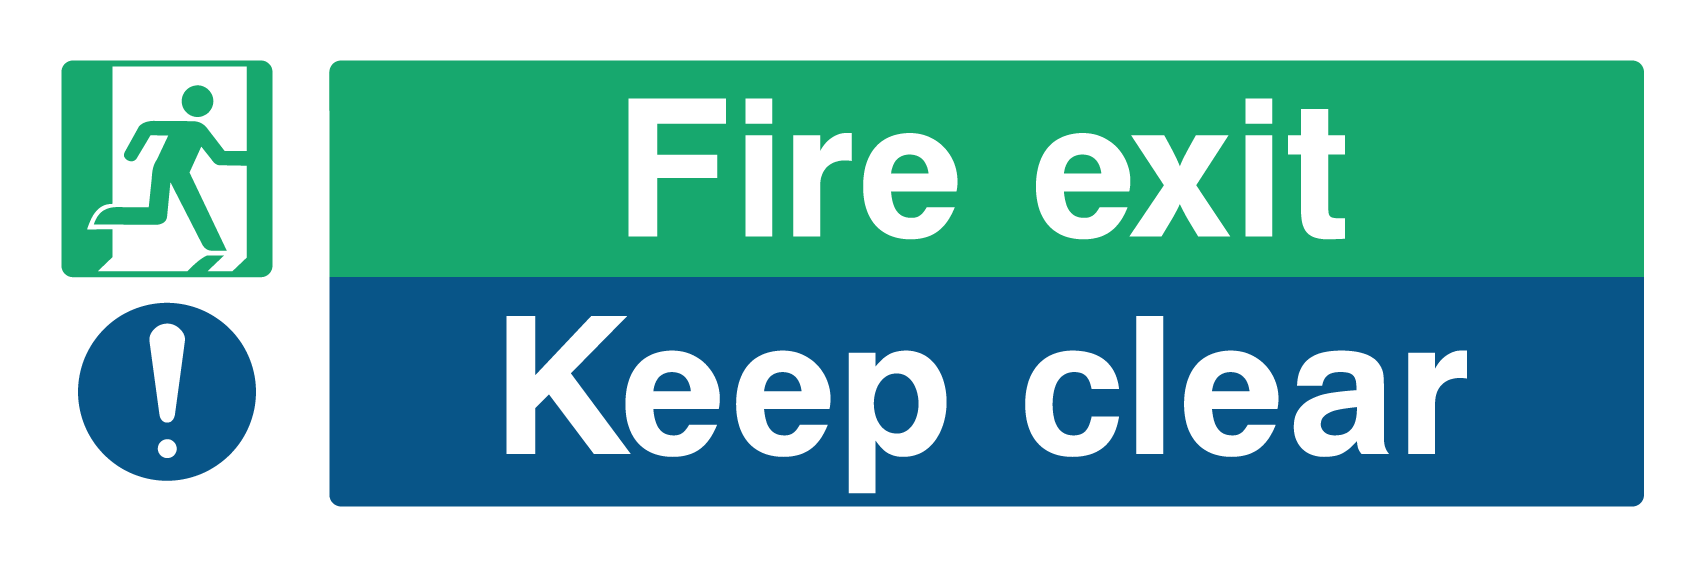 Fire Exit Keep Clear Prints Full Colour Sign Printed Heavy Duty 3935 